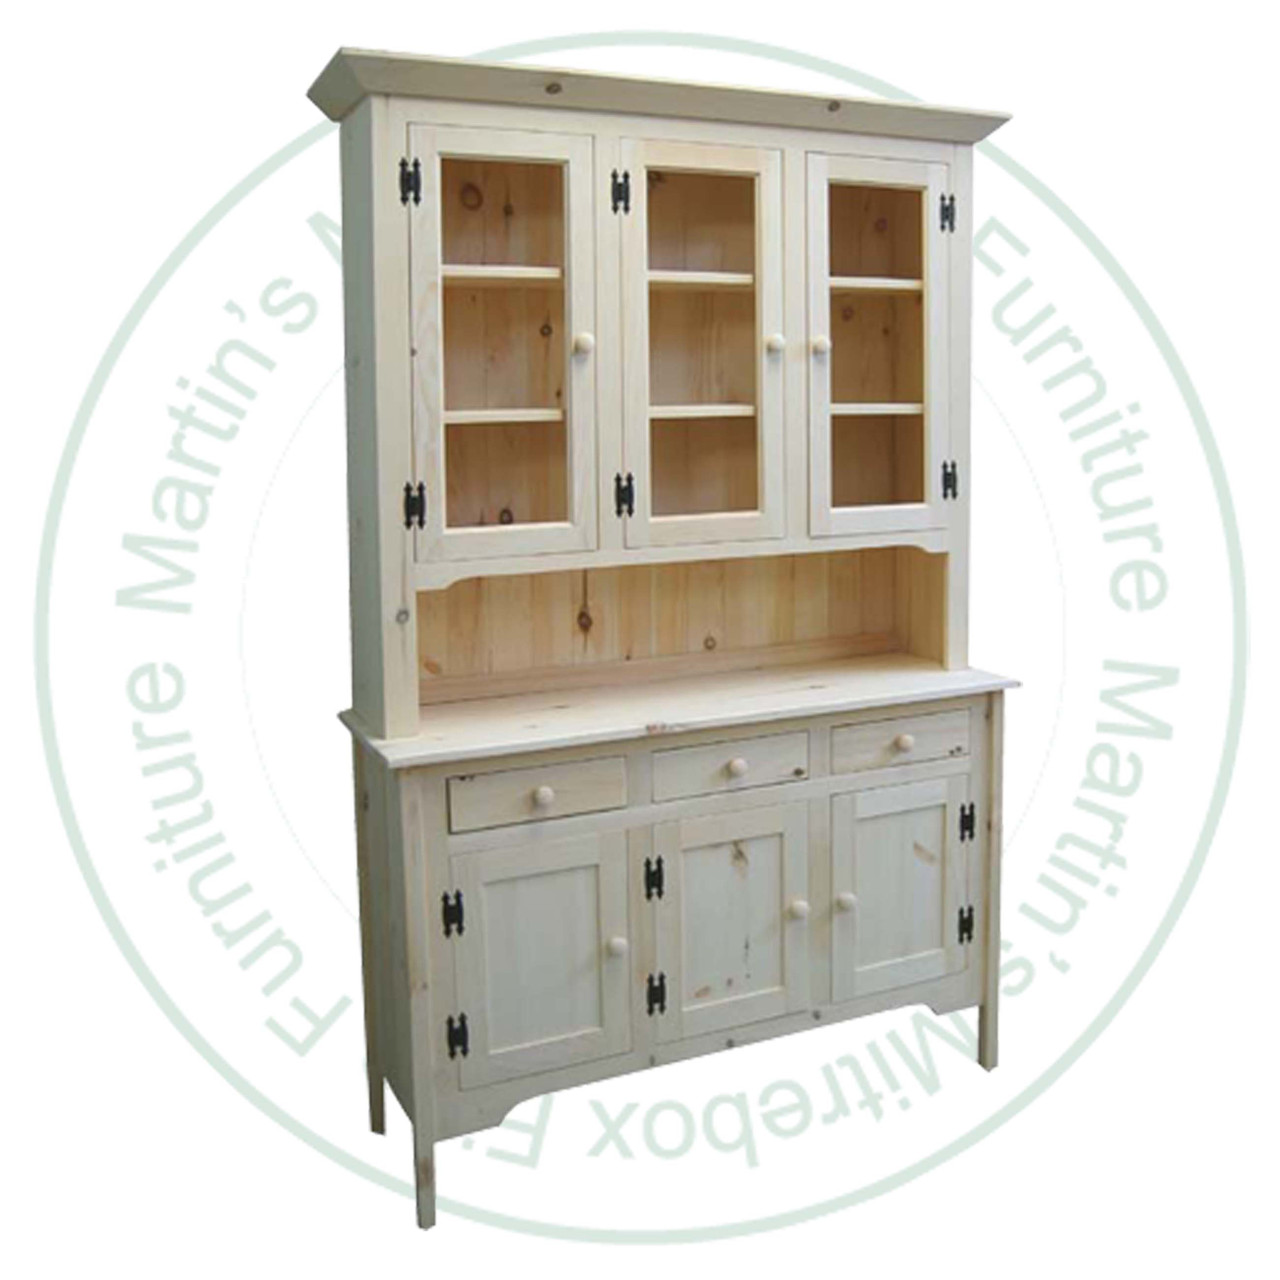 Oak Loons Call Rustic Sideboard 17''D x 83''H x 68''W With 6 Doors And 3 Drawers